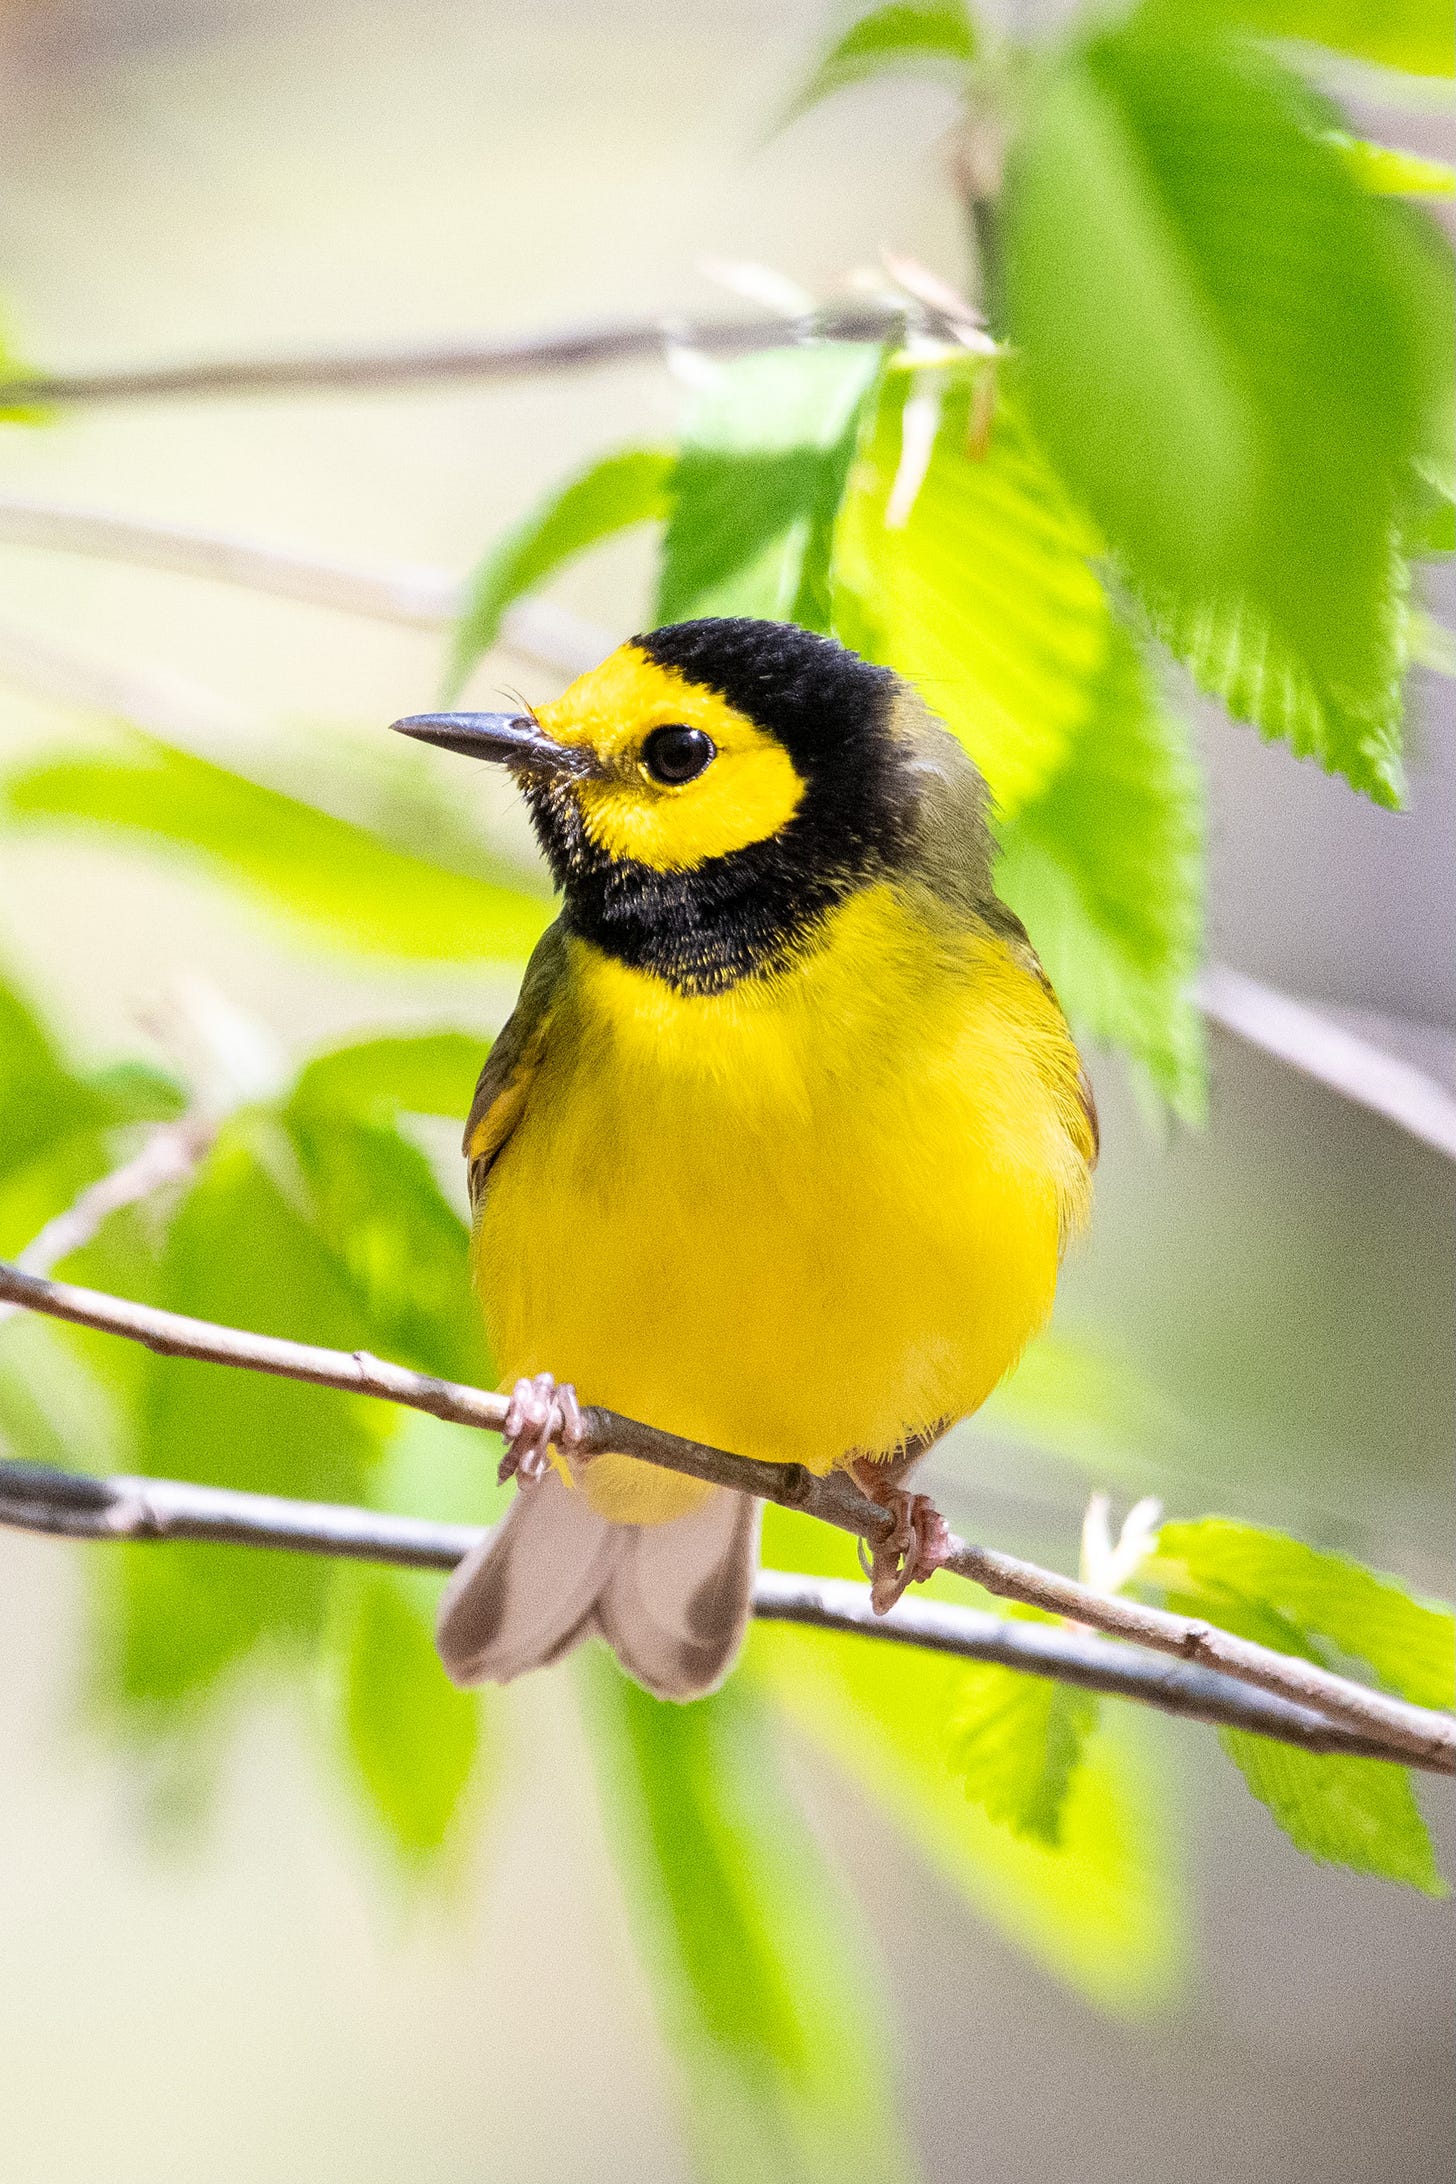 Close-up of a bright yellow bird with soulful black eyes, which looks like it's wearing a monk's cowl